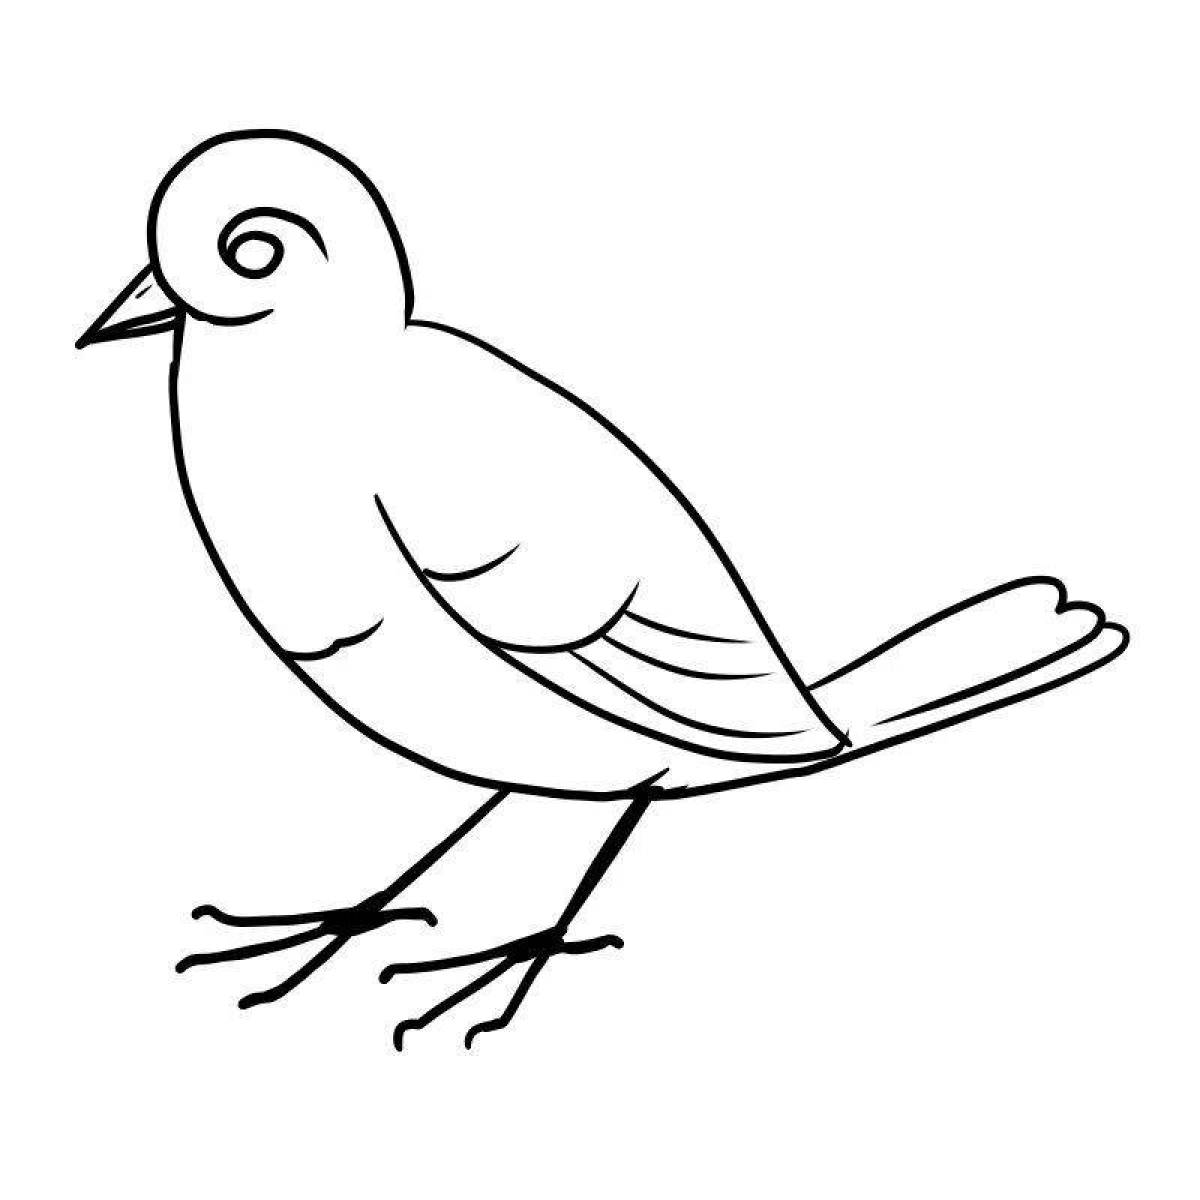 Exquisite sparrow coloring book for 3-4 year olds